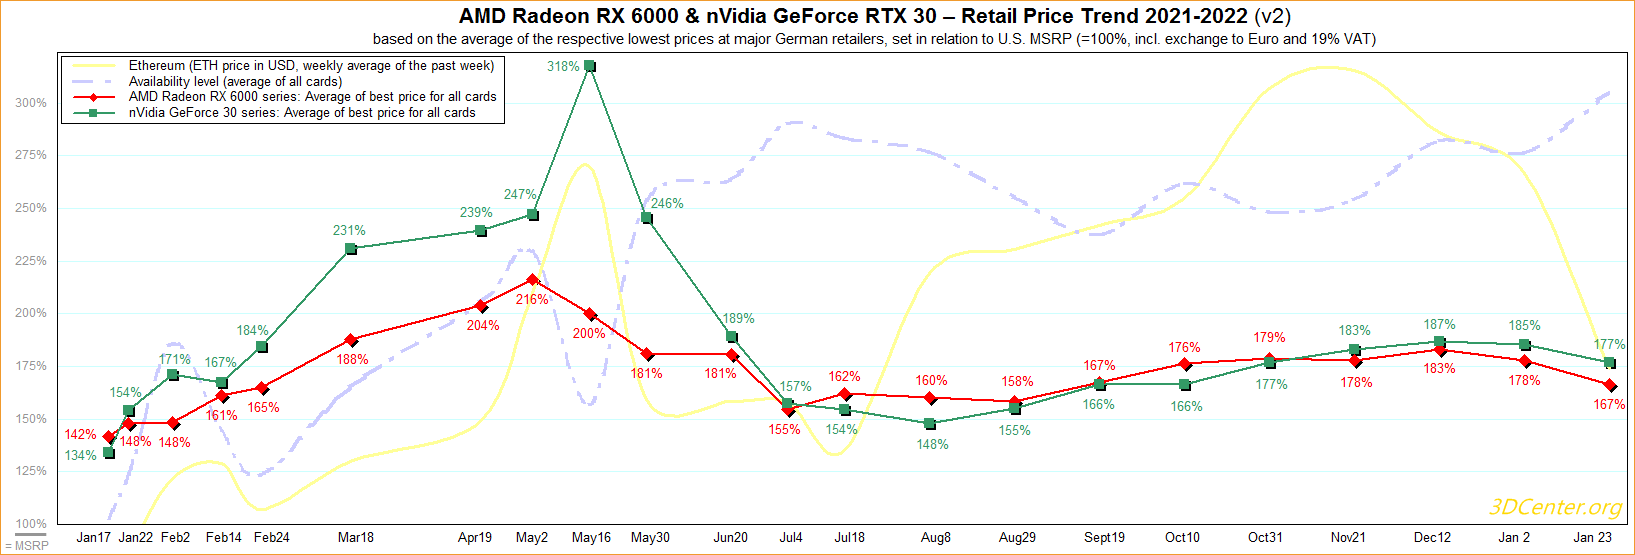 AMD-nVidia-Retail-Price-Trend-2021-2022-v2.png